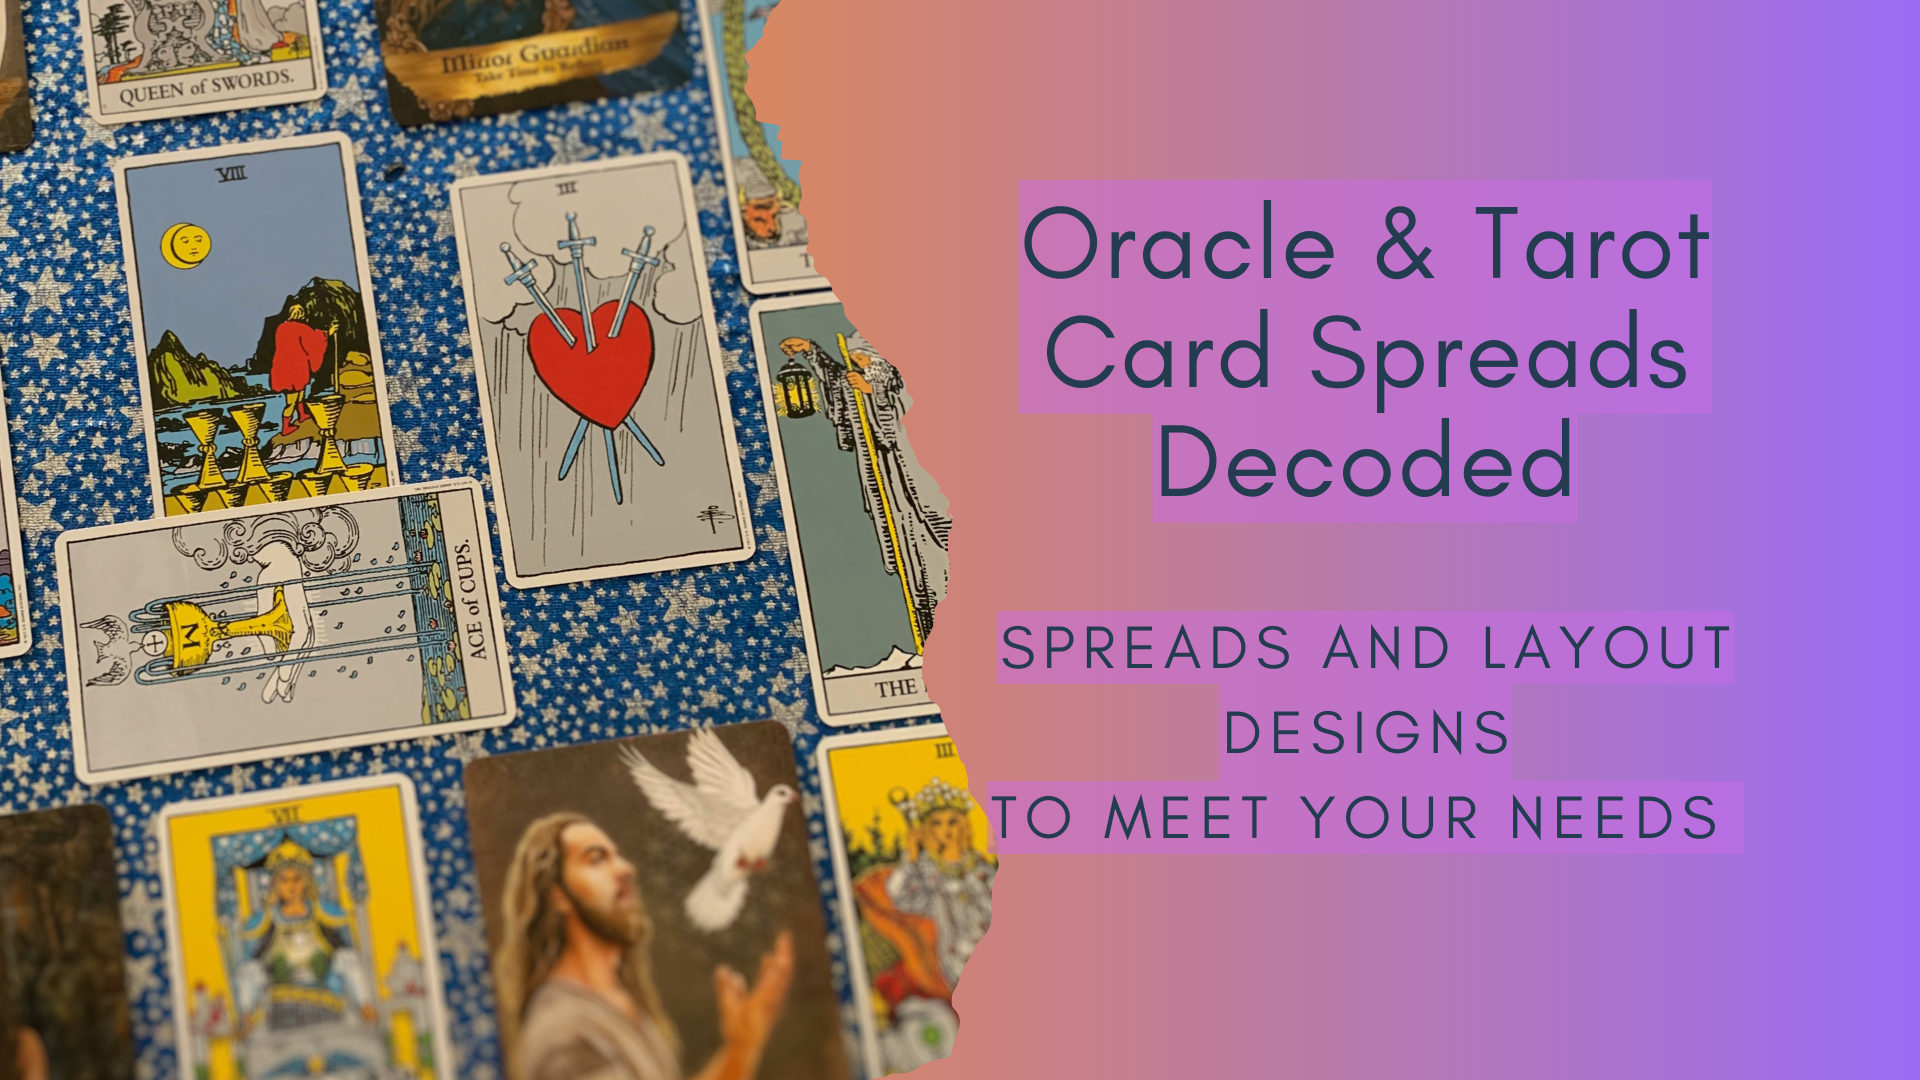 images/Images/Oracle%20&%20Tarot%20Card%20Spreads%20for%20Manifestation%20and%20Change.png#joomlaImage://local-images/Images/Oracle & Tarot Card Spreads for Manifestation and Change.png?width=1920&height=1080